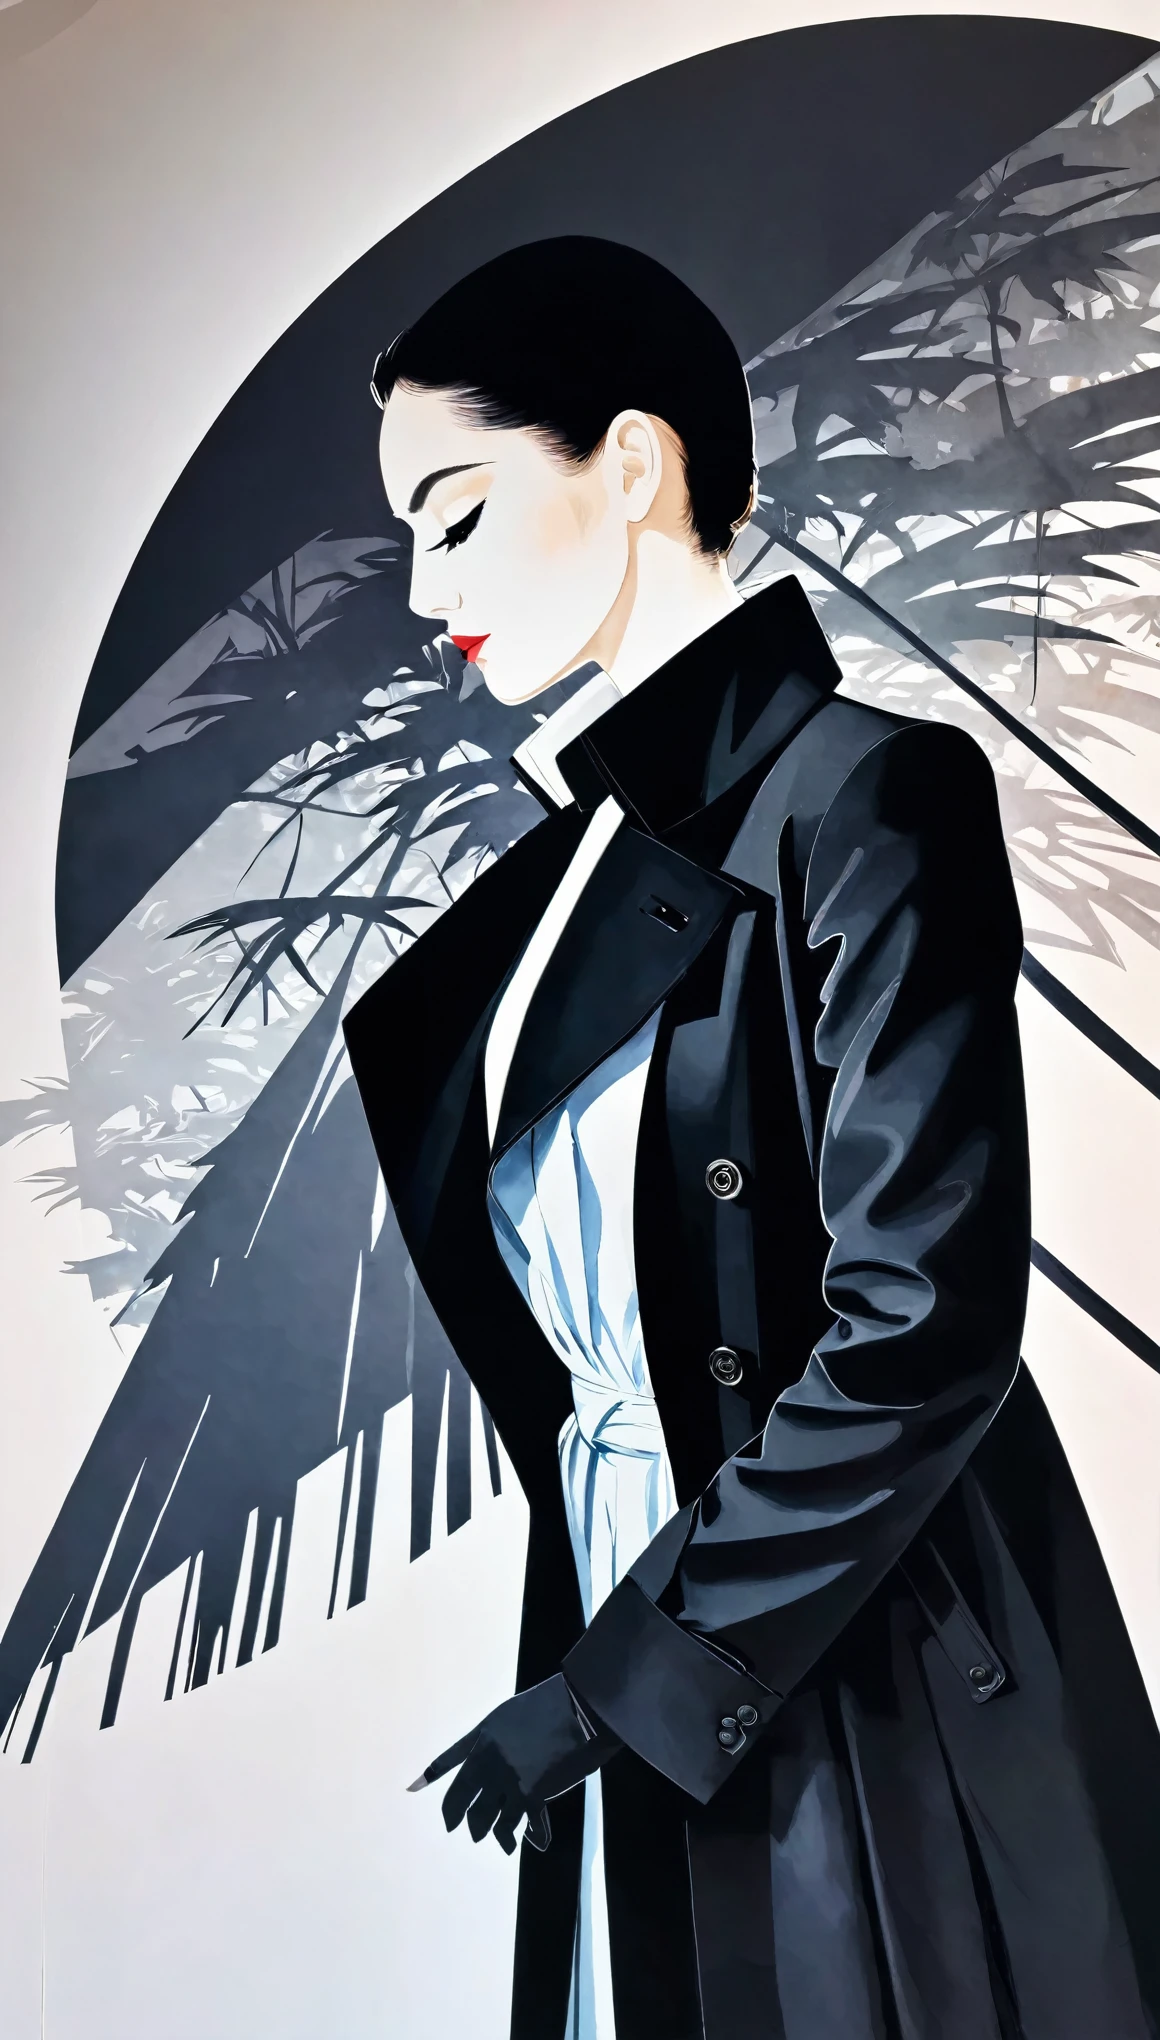 gradient artwork, fusion of watercolors and oil paintings, fusion of paper cutting and shadow puppetry, mix of monochrome and color, best quality, super fine, 16k, 2.5D, delicate and dynamic depiction, Solid black, white lines, person wearing a black trench coat, prime lenses, lens filters, clear subject